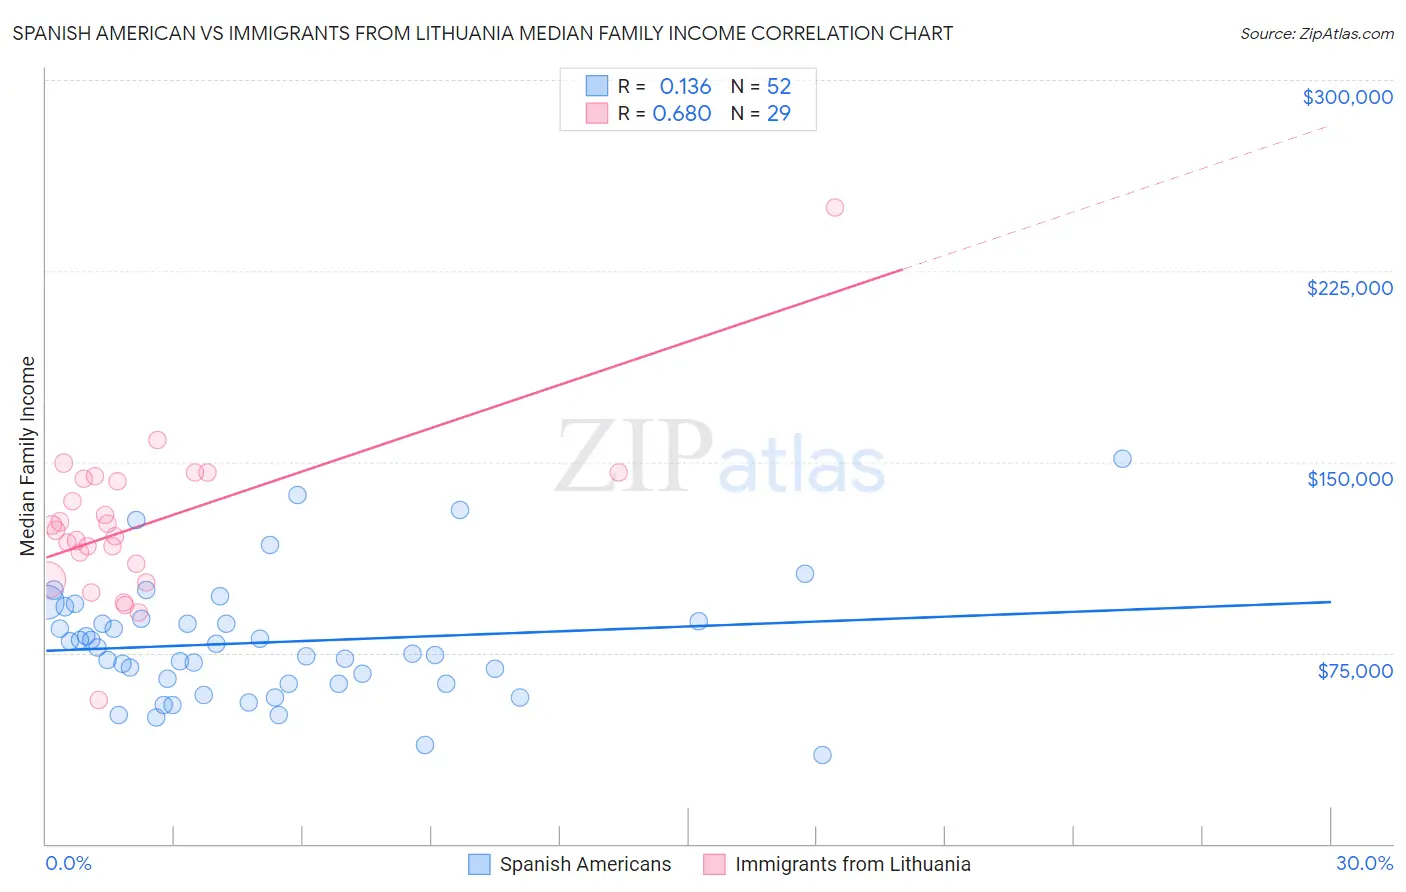 Spanish American vs Immigrants from Lithuania Median Family Income